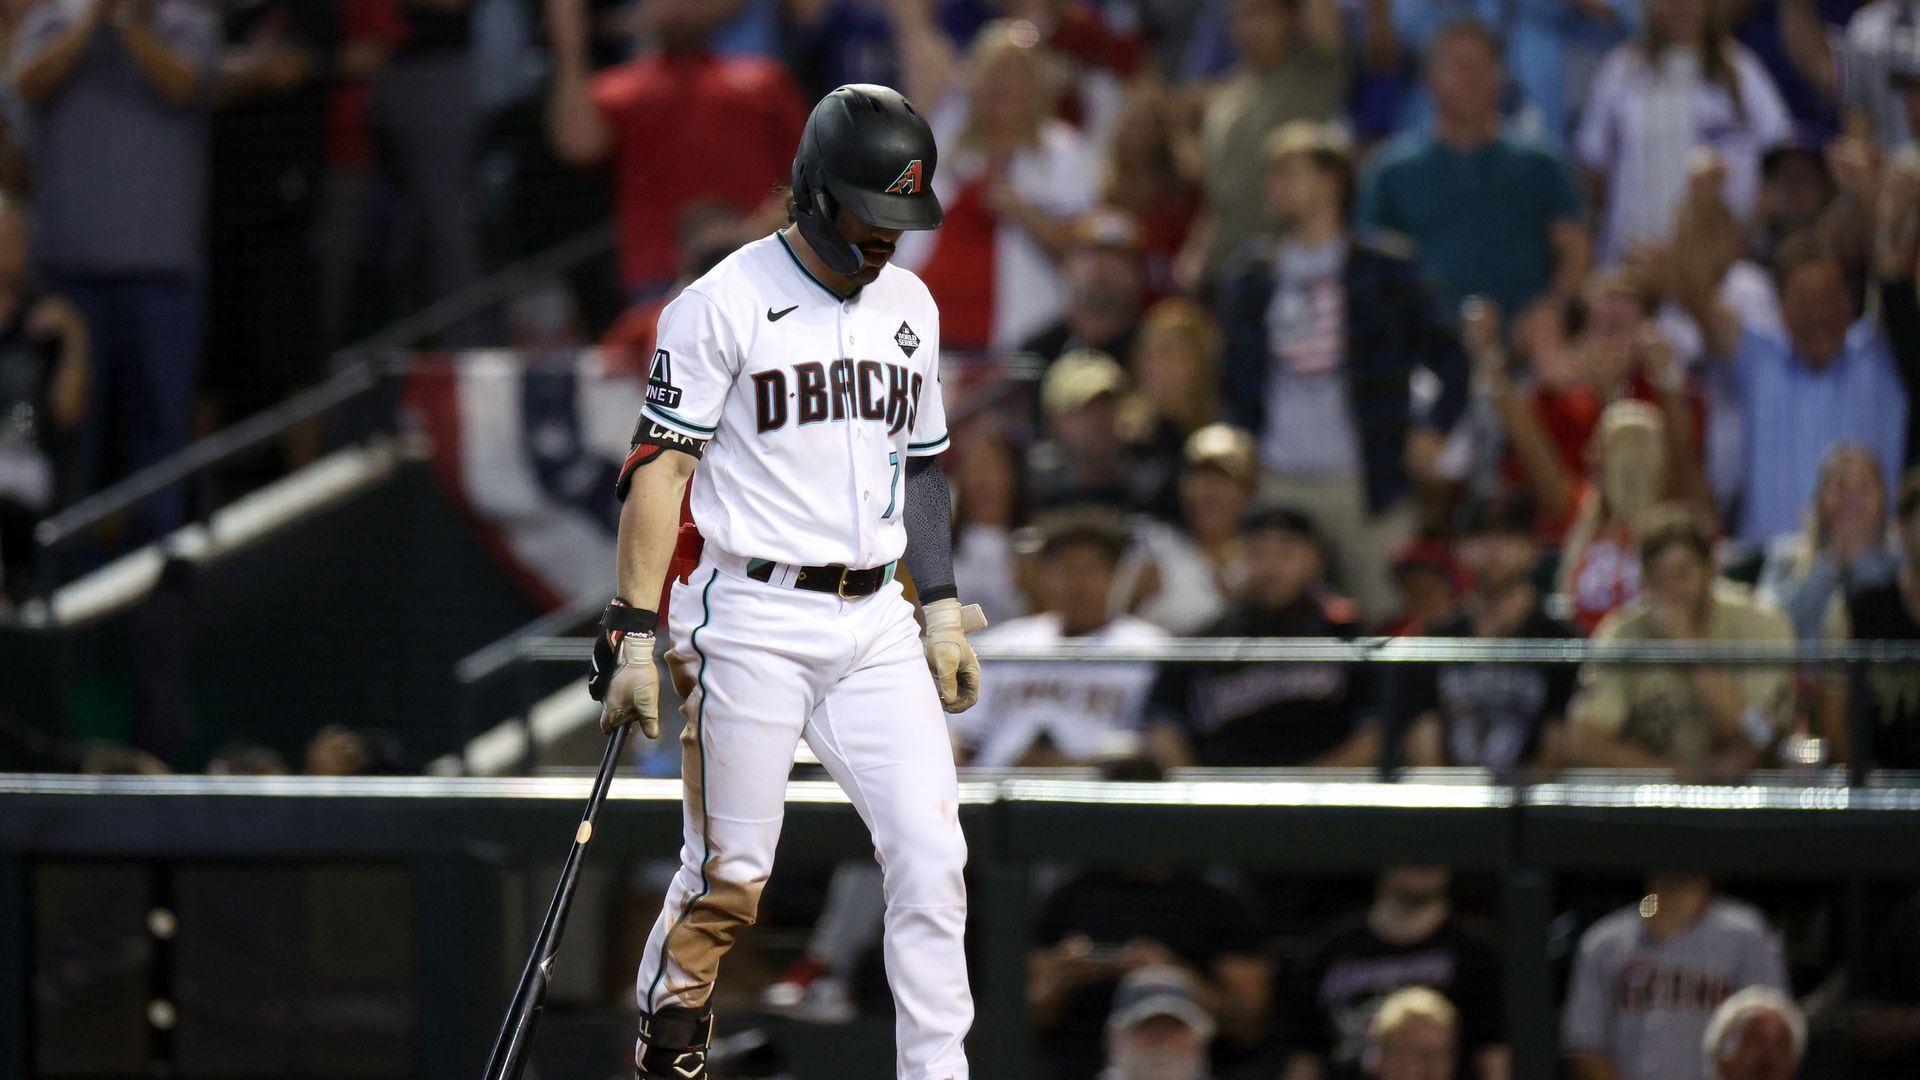 It's official: Yankees will miss MLB playoffs after loss to Diamondbacks